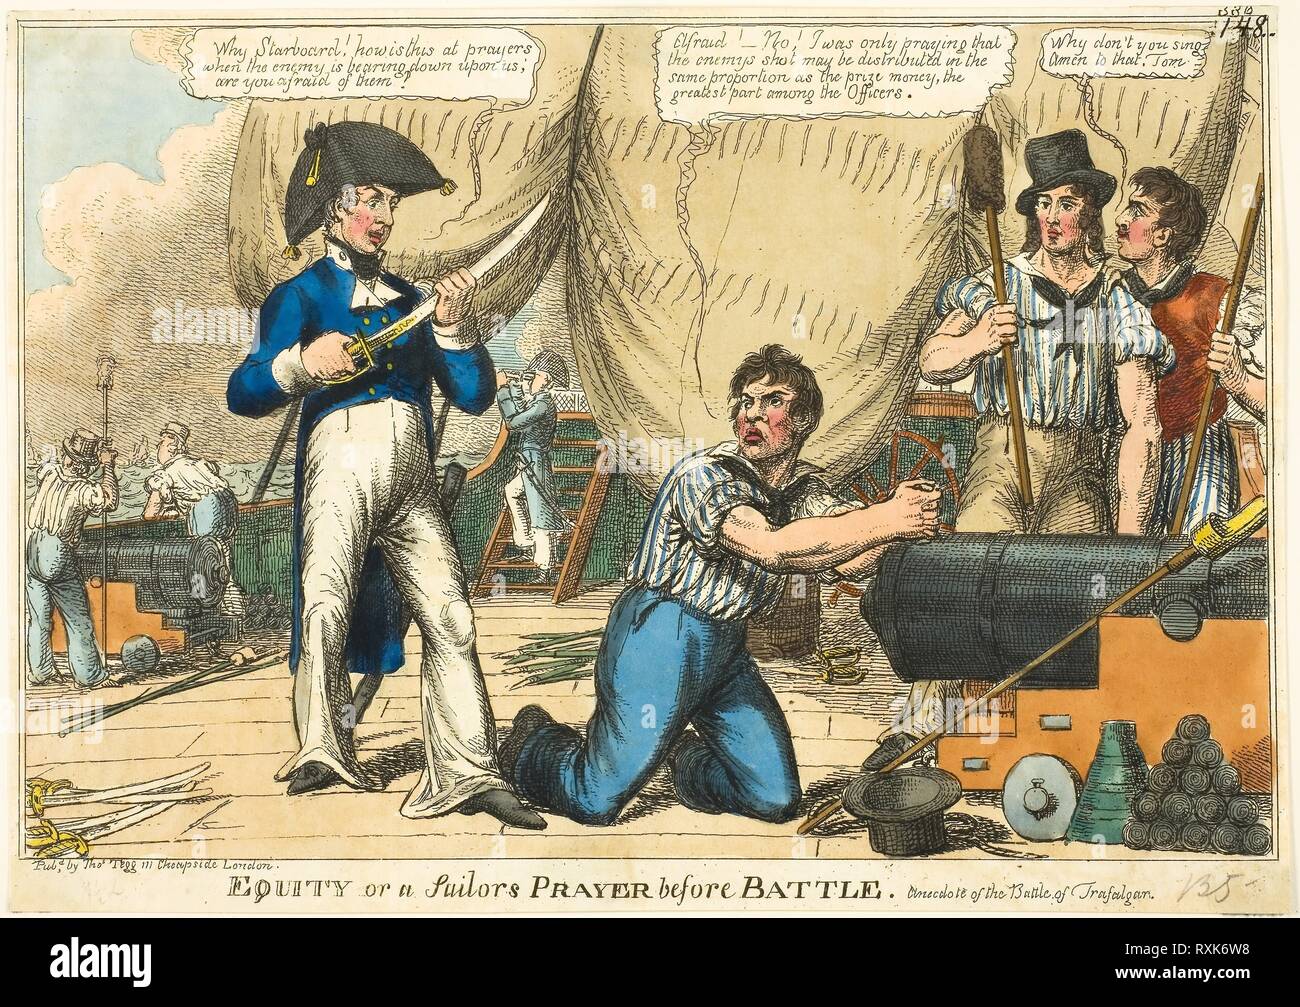 Equity, or a Sailor's Prayer before Battle. Charles WIlliams (English, active 1797-1830); published by Thomas Tegg (English, 1776-1845). Date: 1805. Dimensions: 255 × 355 mm. Hand-colored etching on ivory wove paper. Origin: England. Museum: The Chicago Art Institute. Stock Photo